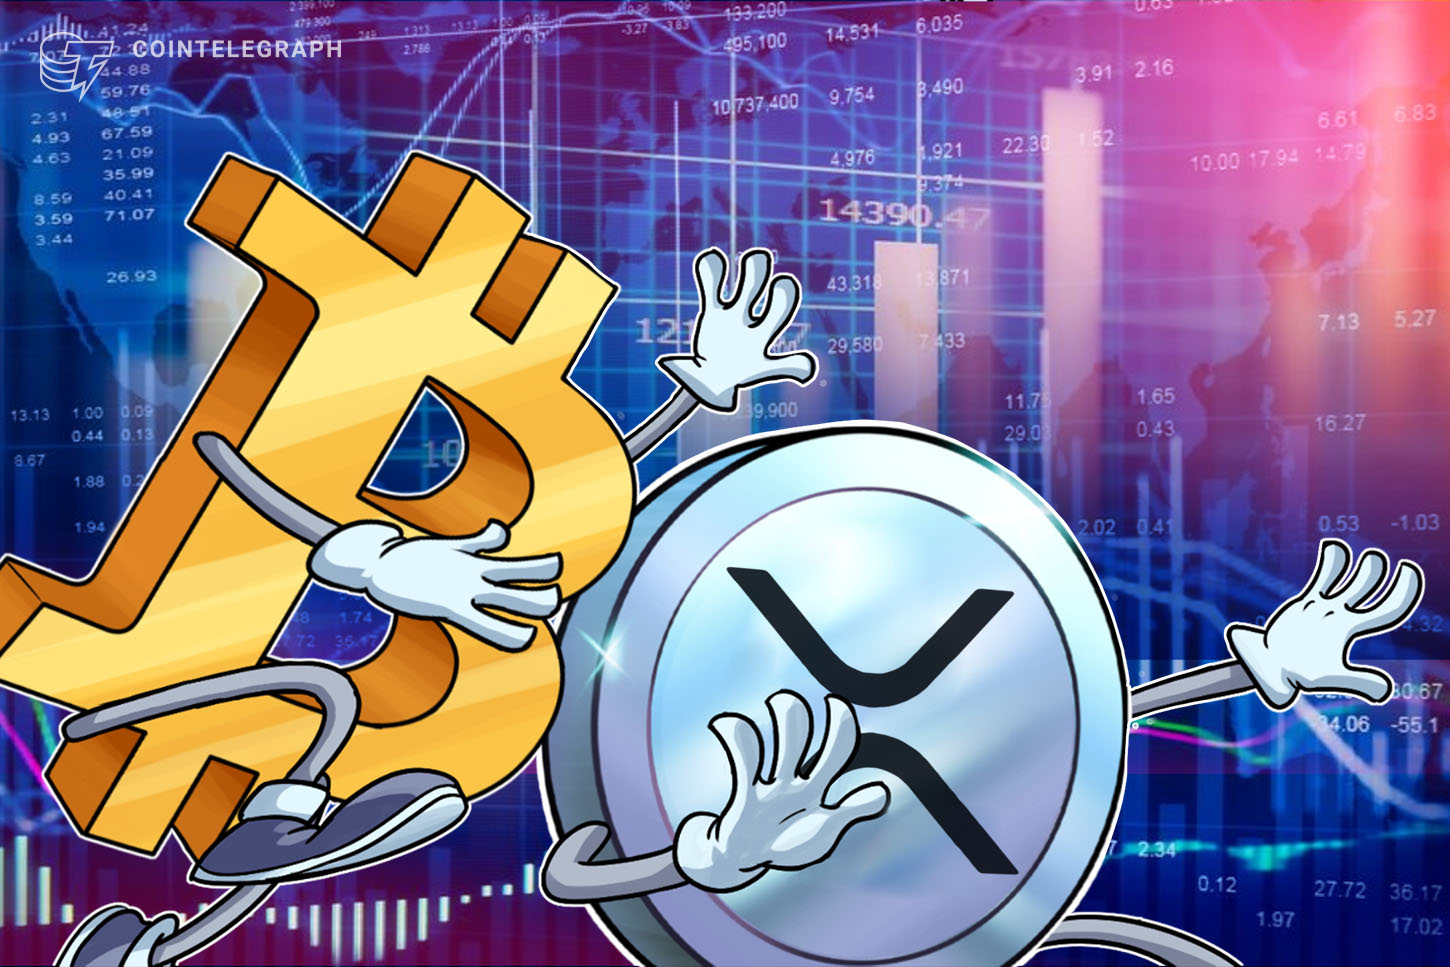 Bitcoin value rally cools down as Polkadot features 34% in first week of ‘altseason’